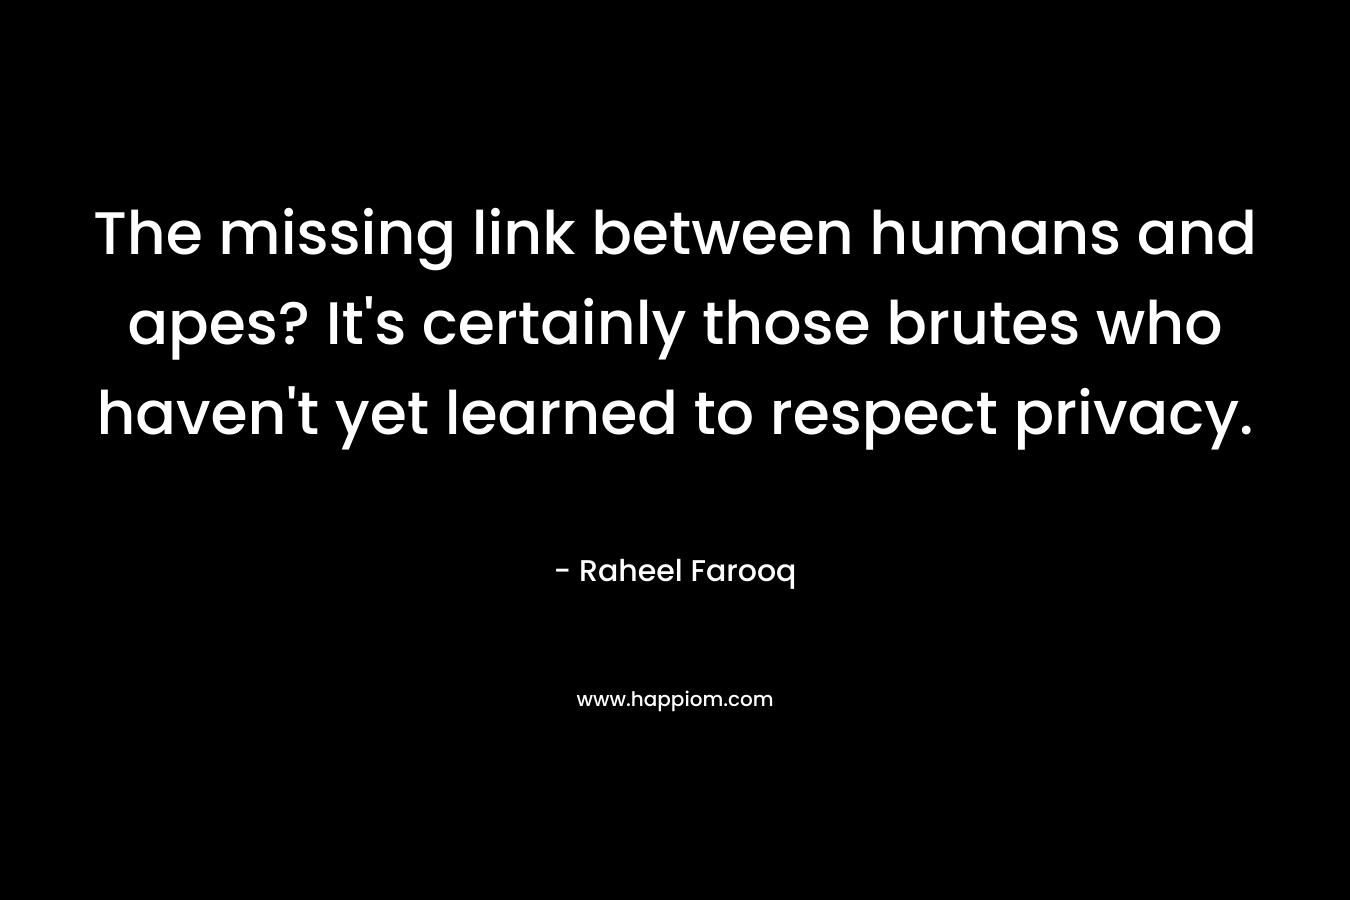 The missing link between humans and apes? It's certainly those brutes who haven't yet learned to respect privacy.